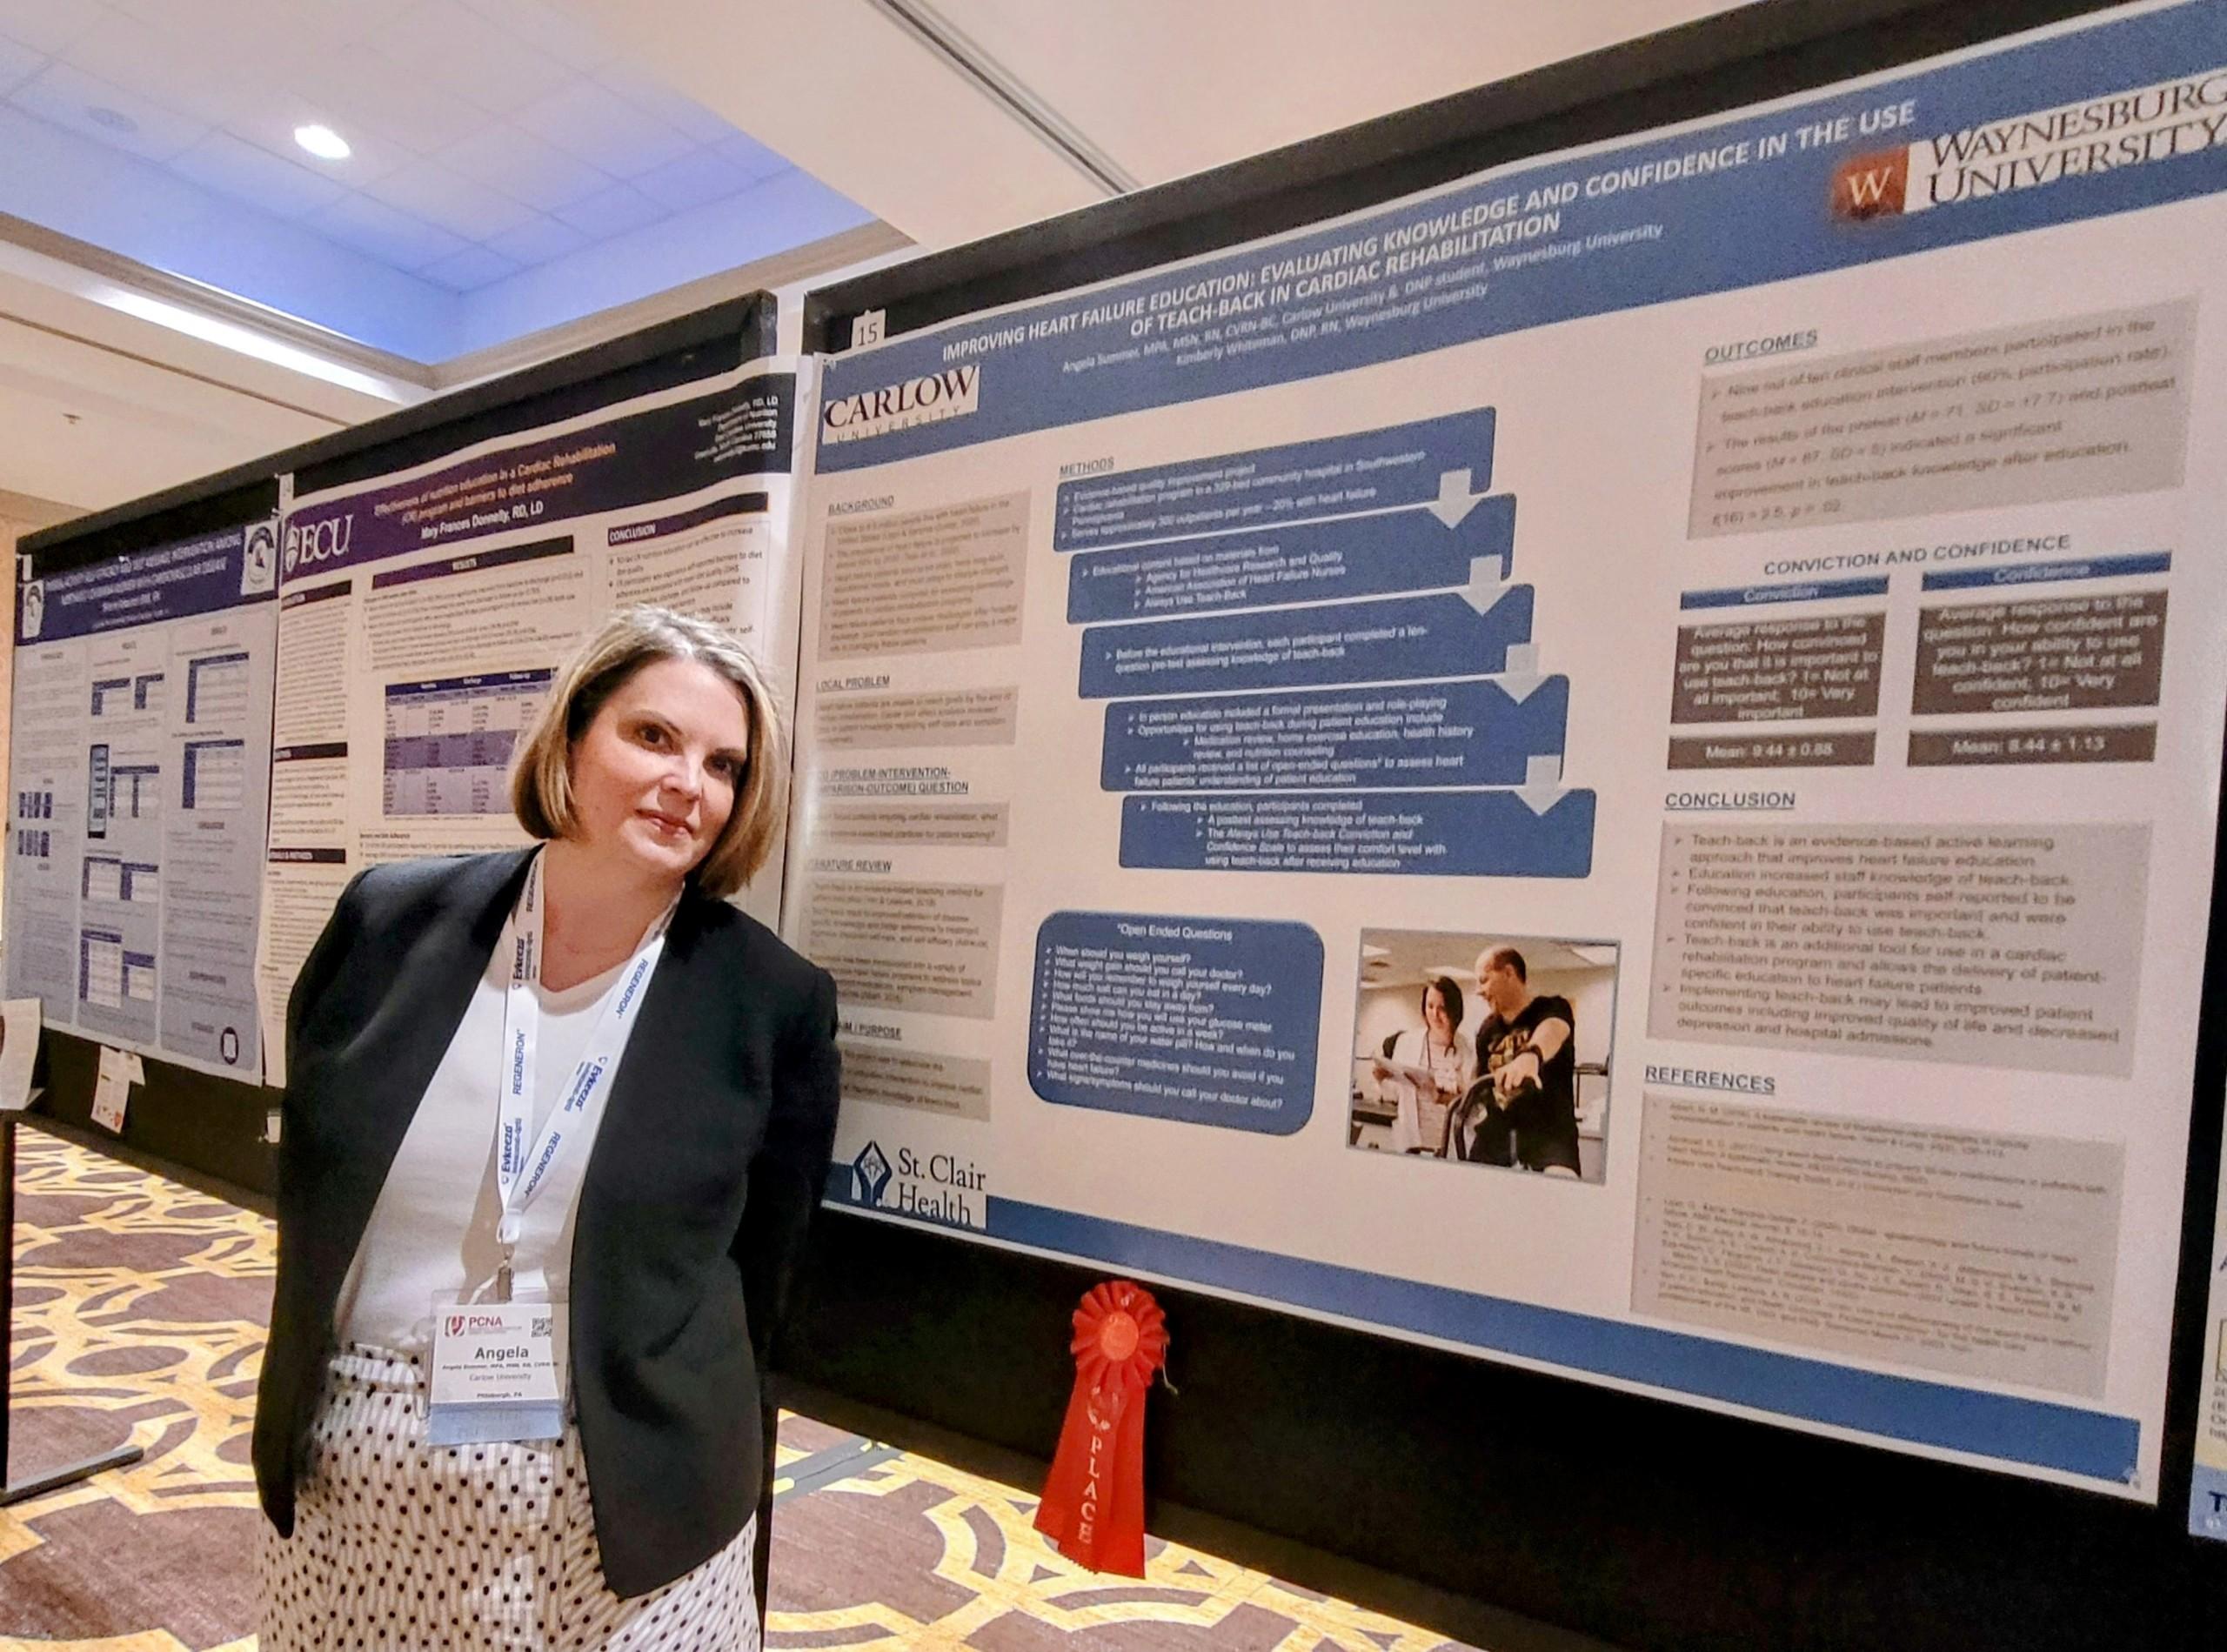 DNP student Angela Summers won second place on her poster presentation at the 29th Annual Cardiovascular Symposium